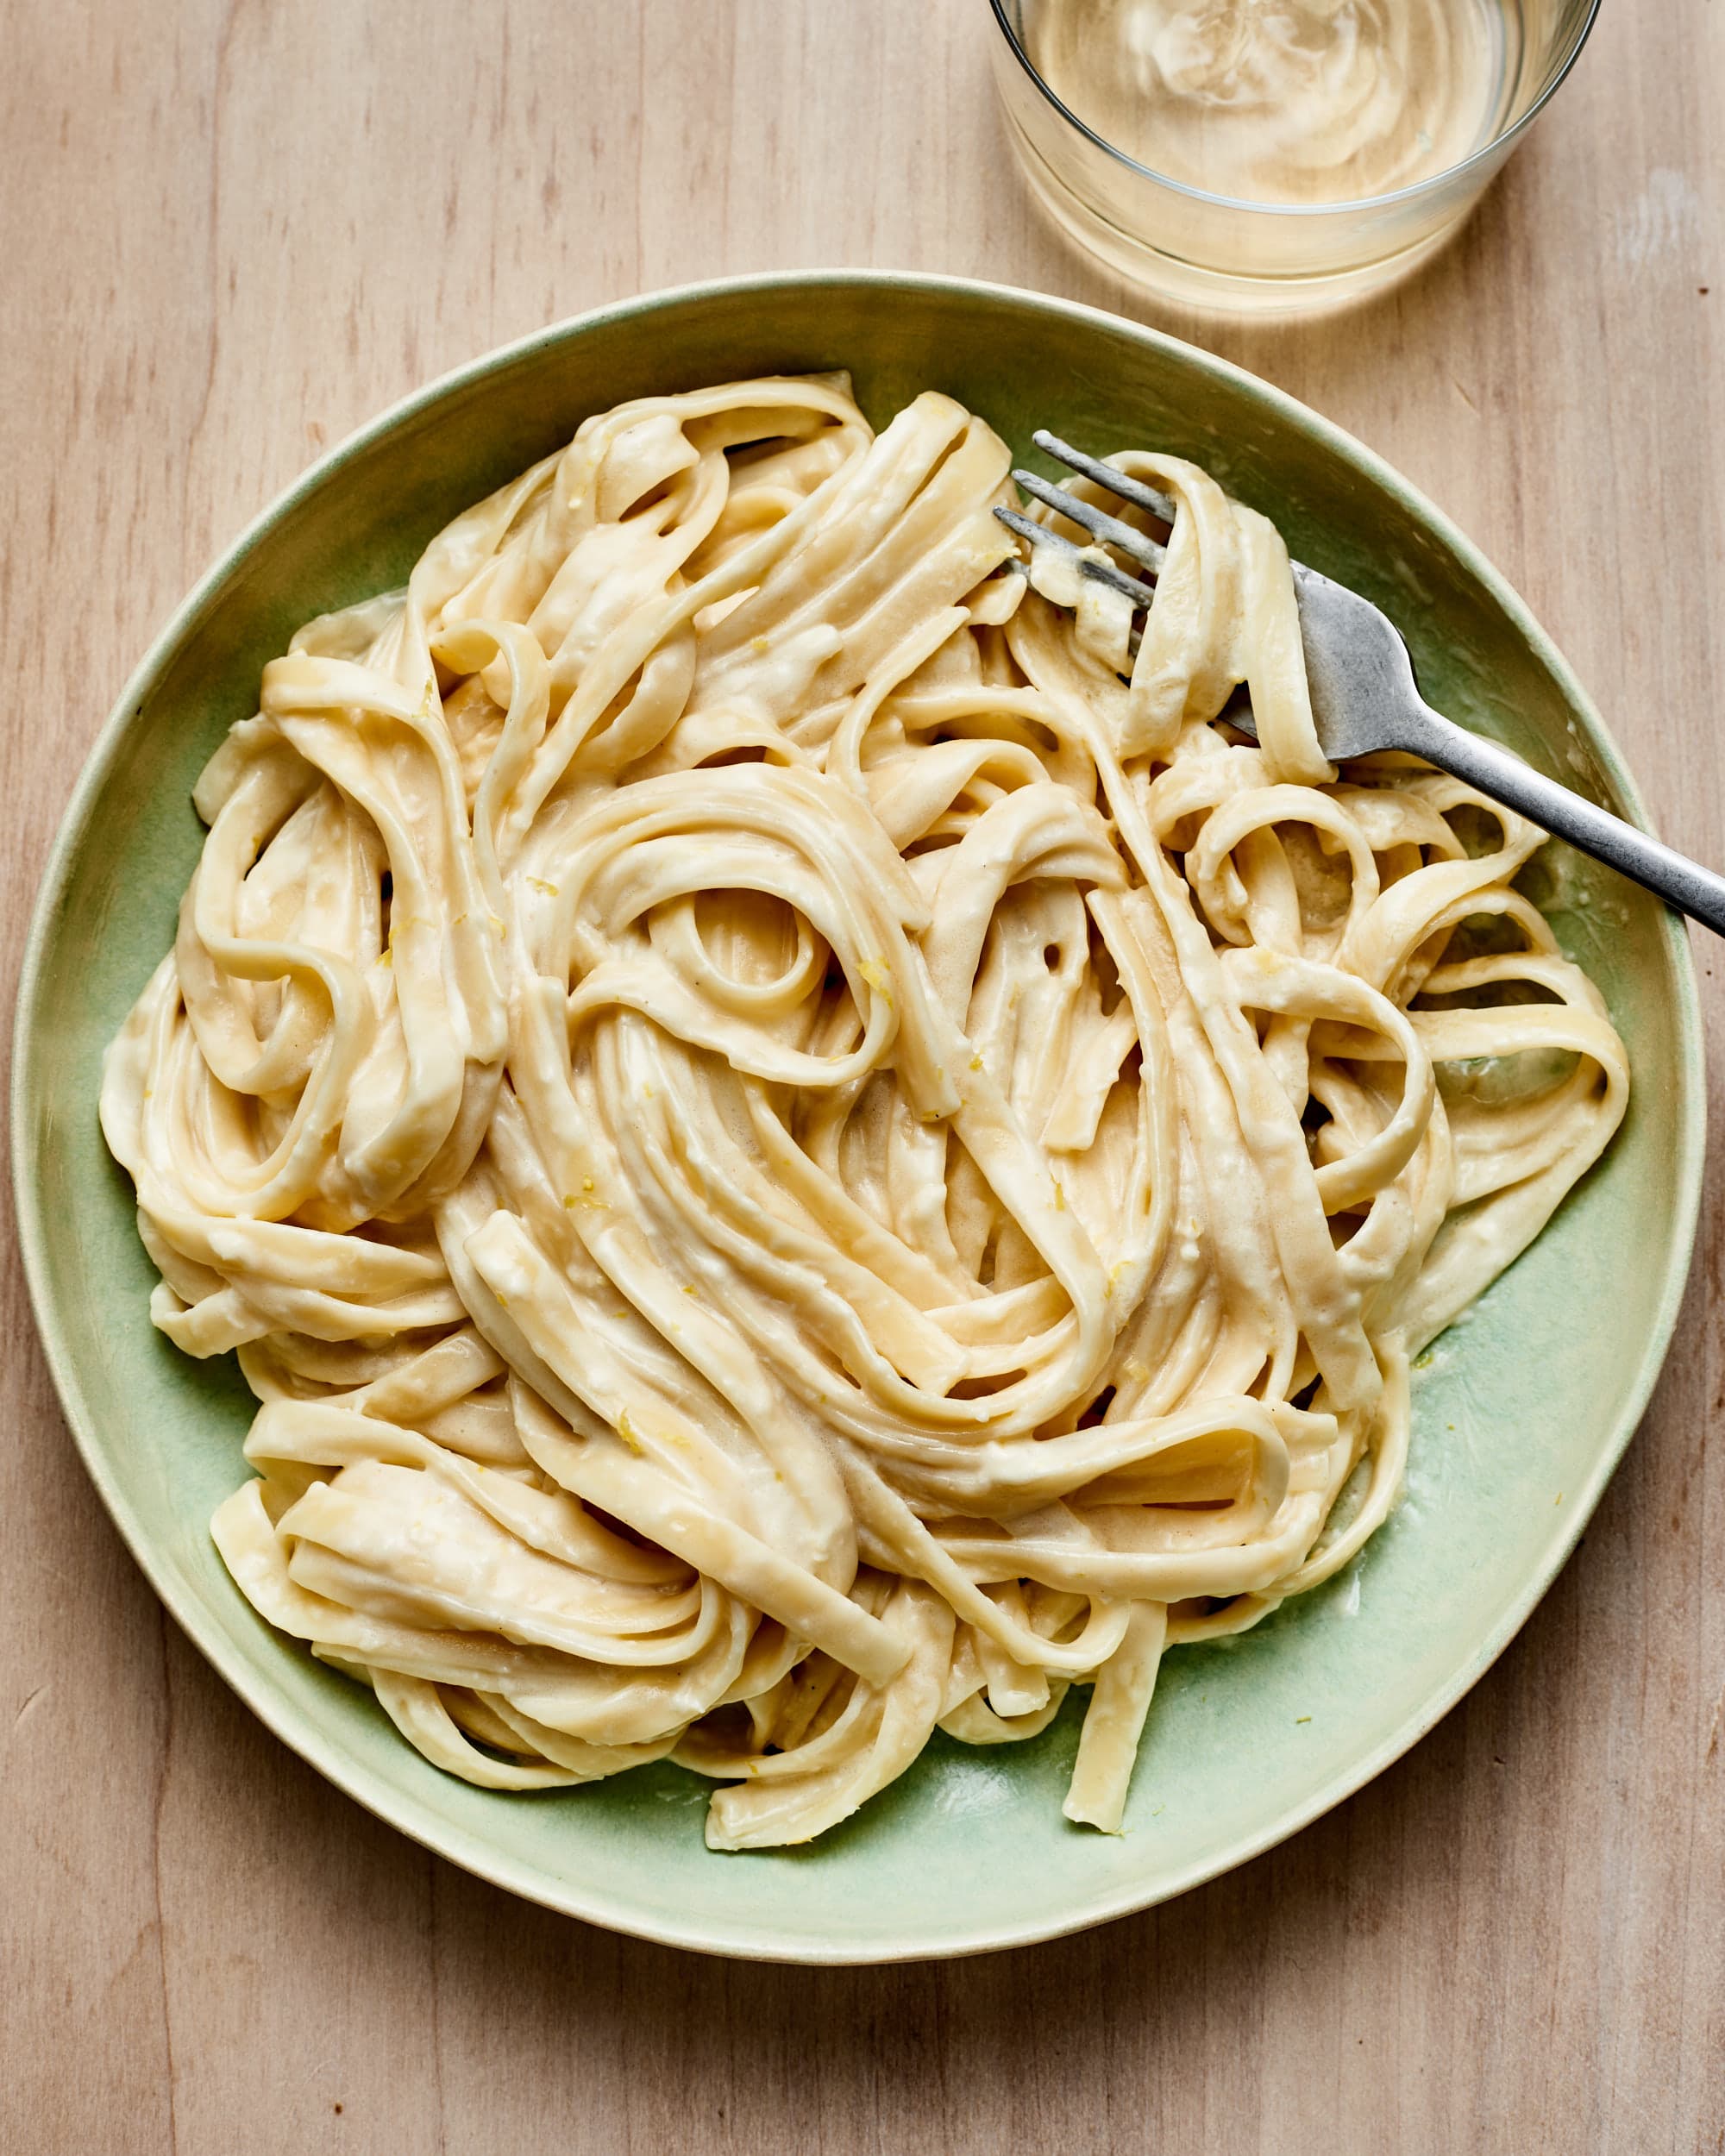 You've Been Using the Wrong Cheese for Your Pasta | Kitchn